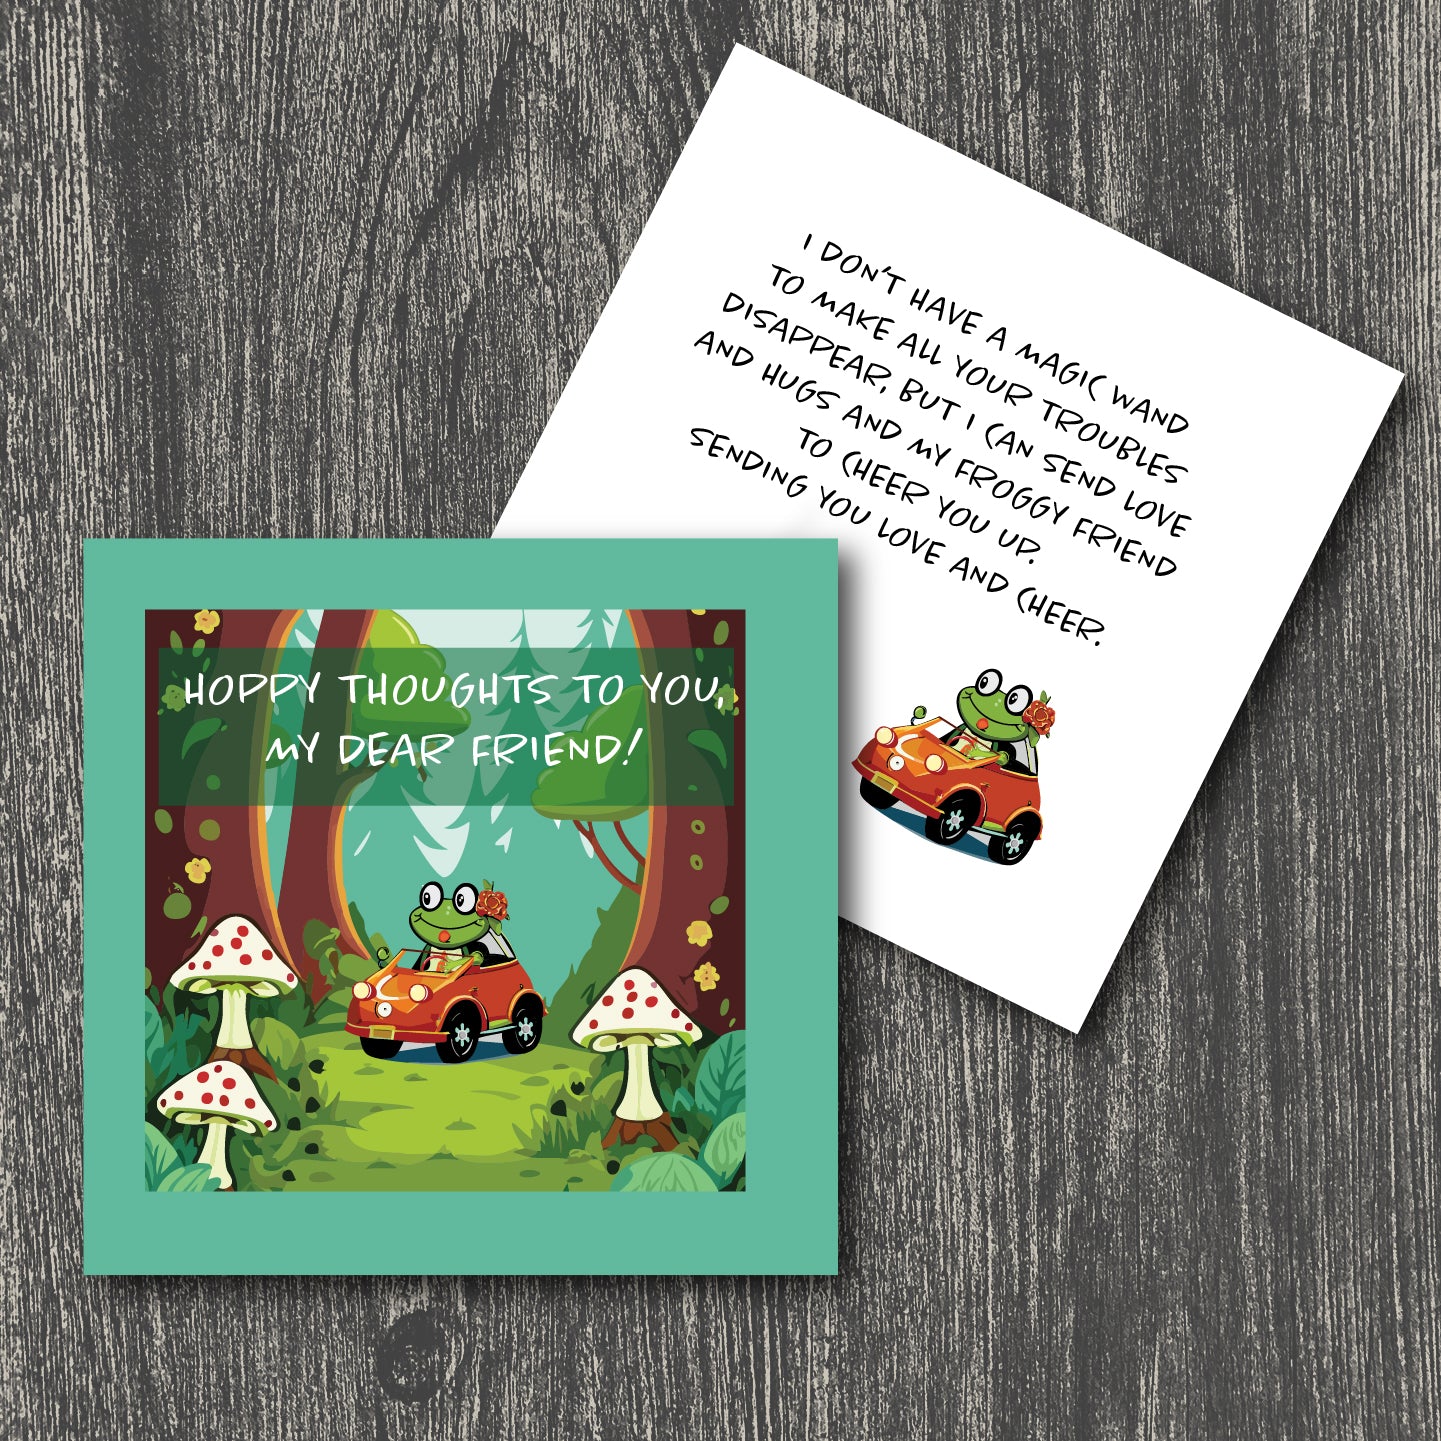 Frog Friends Cheer Card, 5.25"x5.25" square, envelope included, interior text below